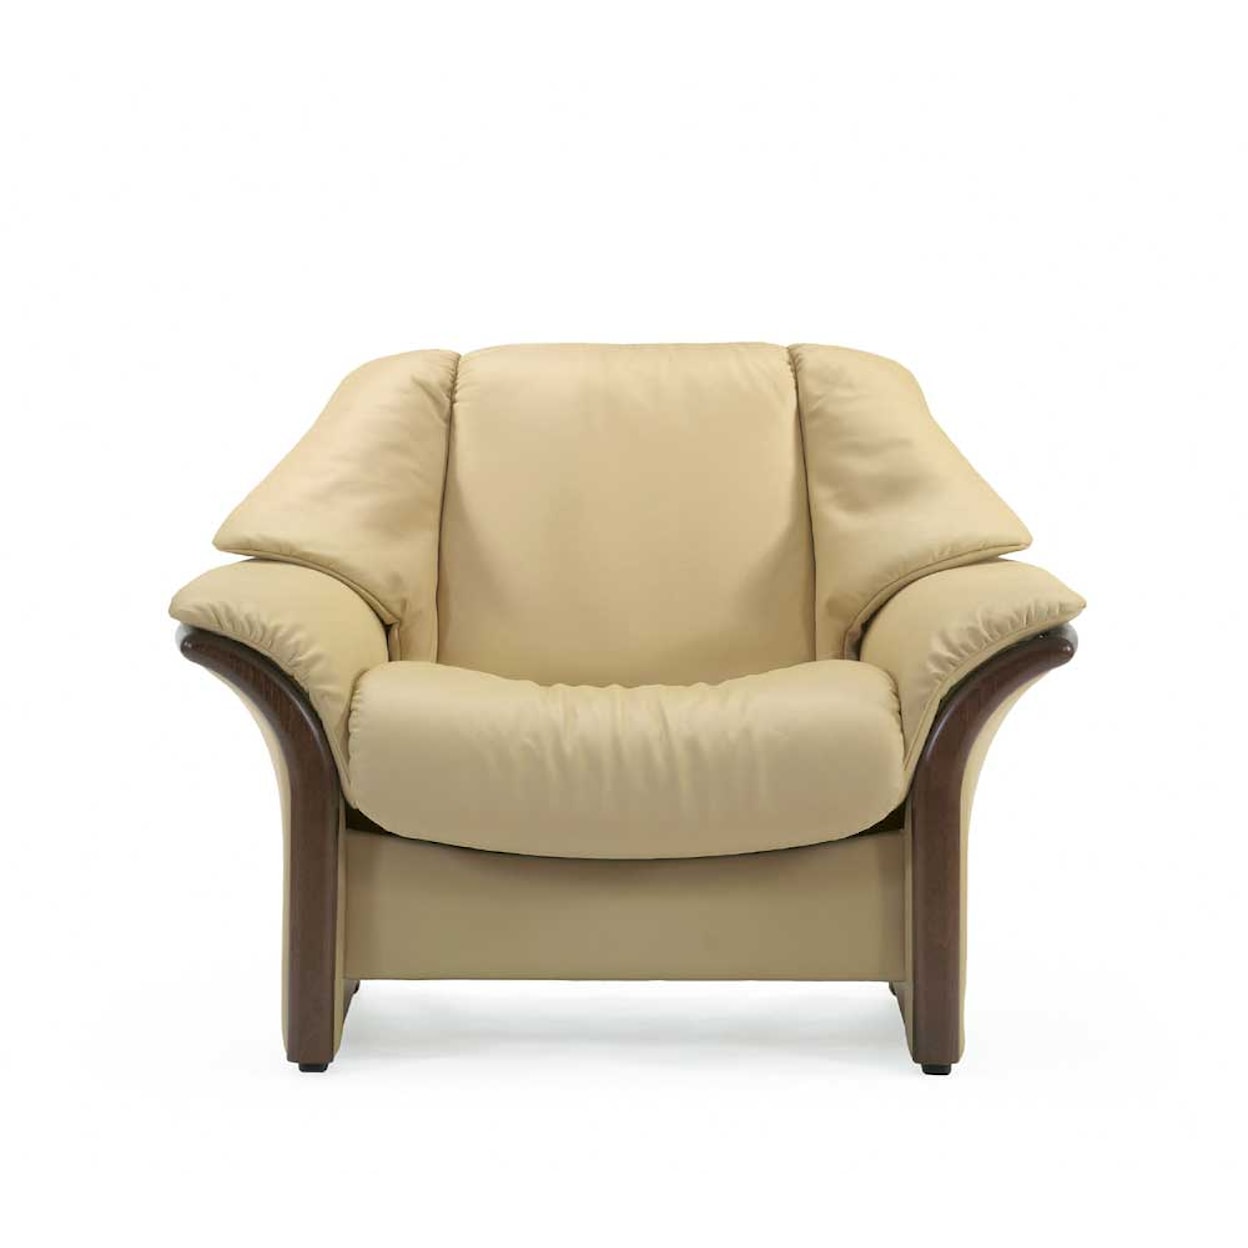 Stressless Eldorado Low-Back Reclining Chair with Arms